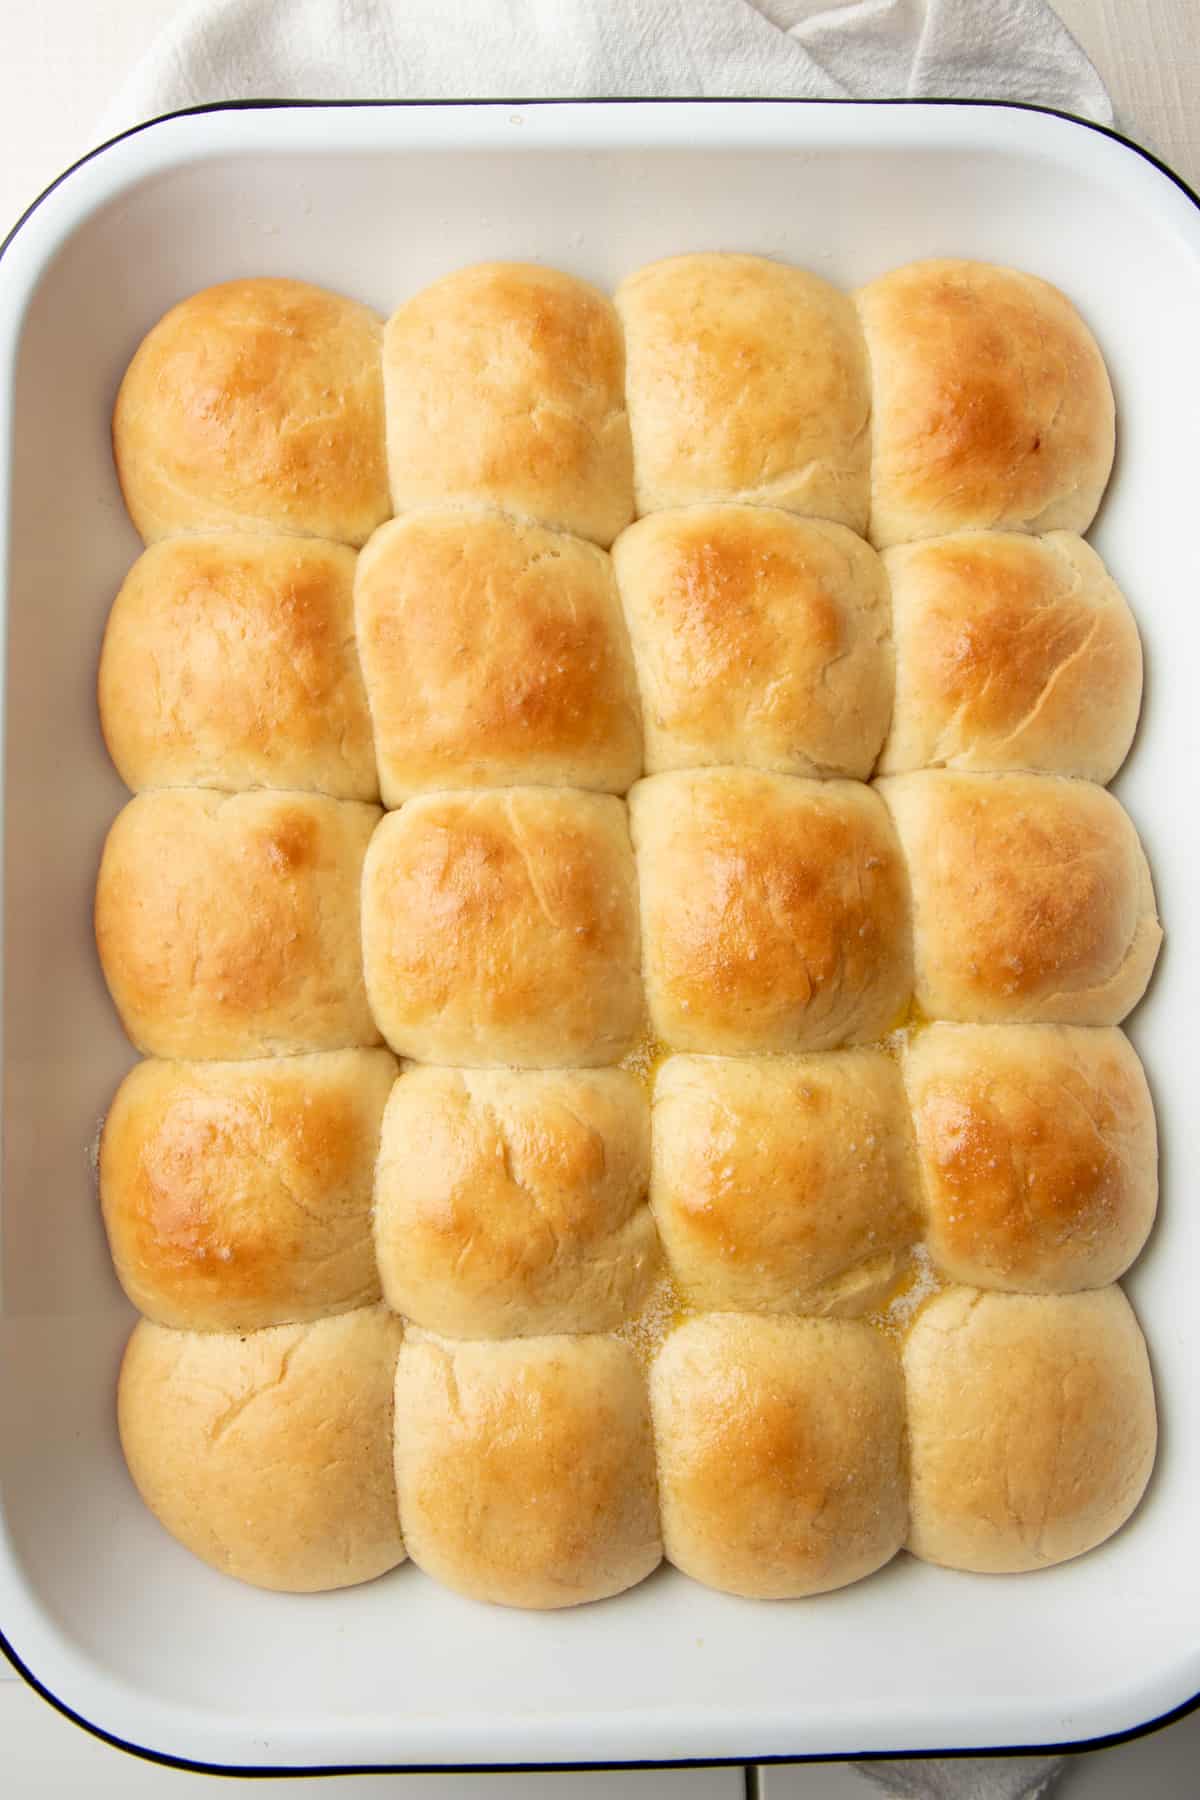 A pan of buttery yeast rolls sits on a cloth napkin.